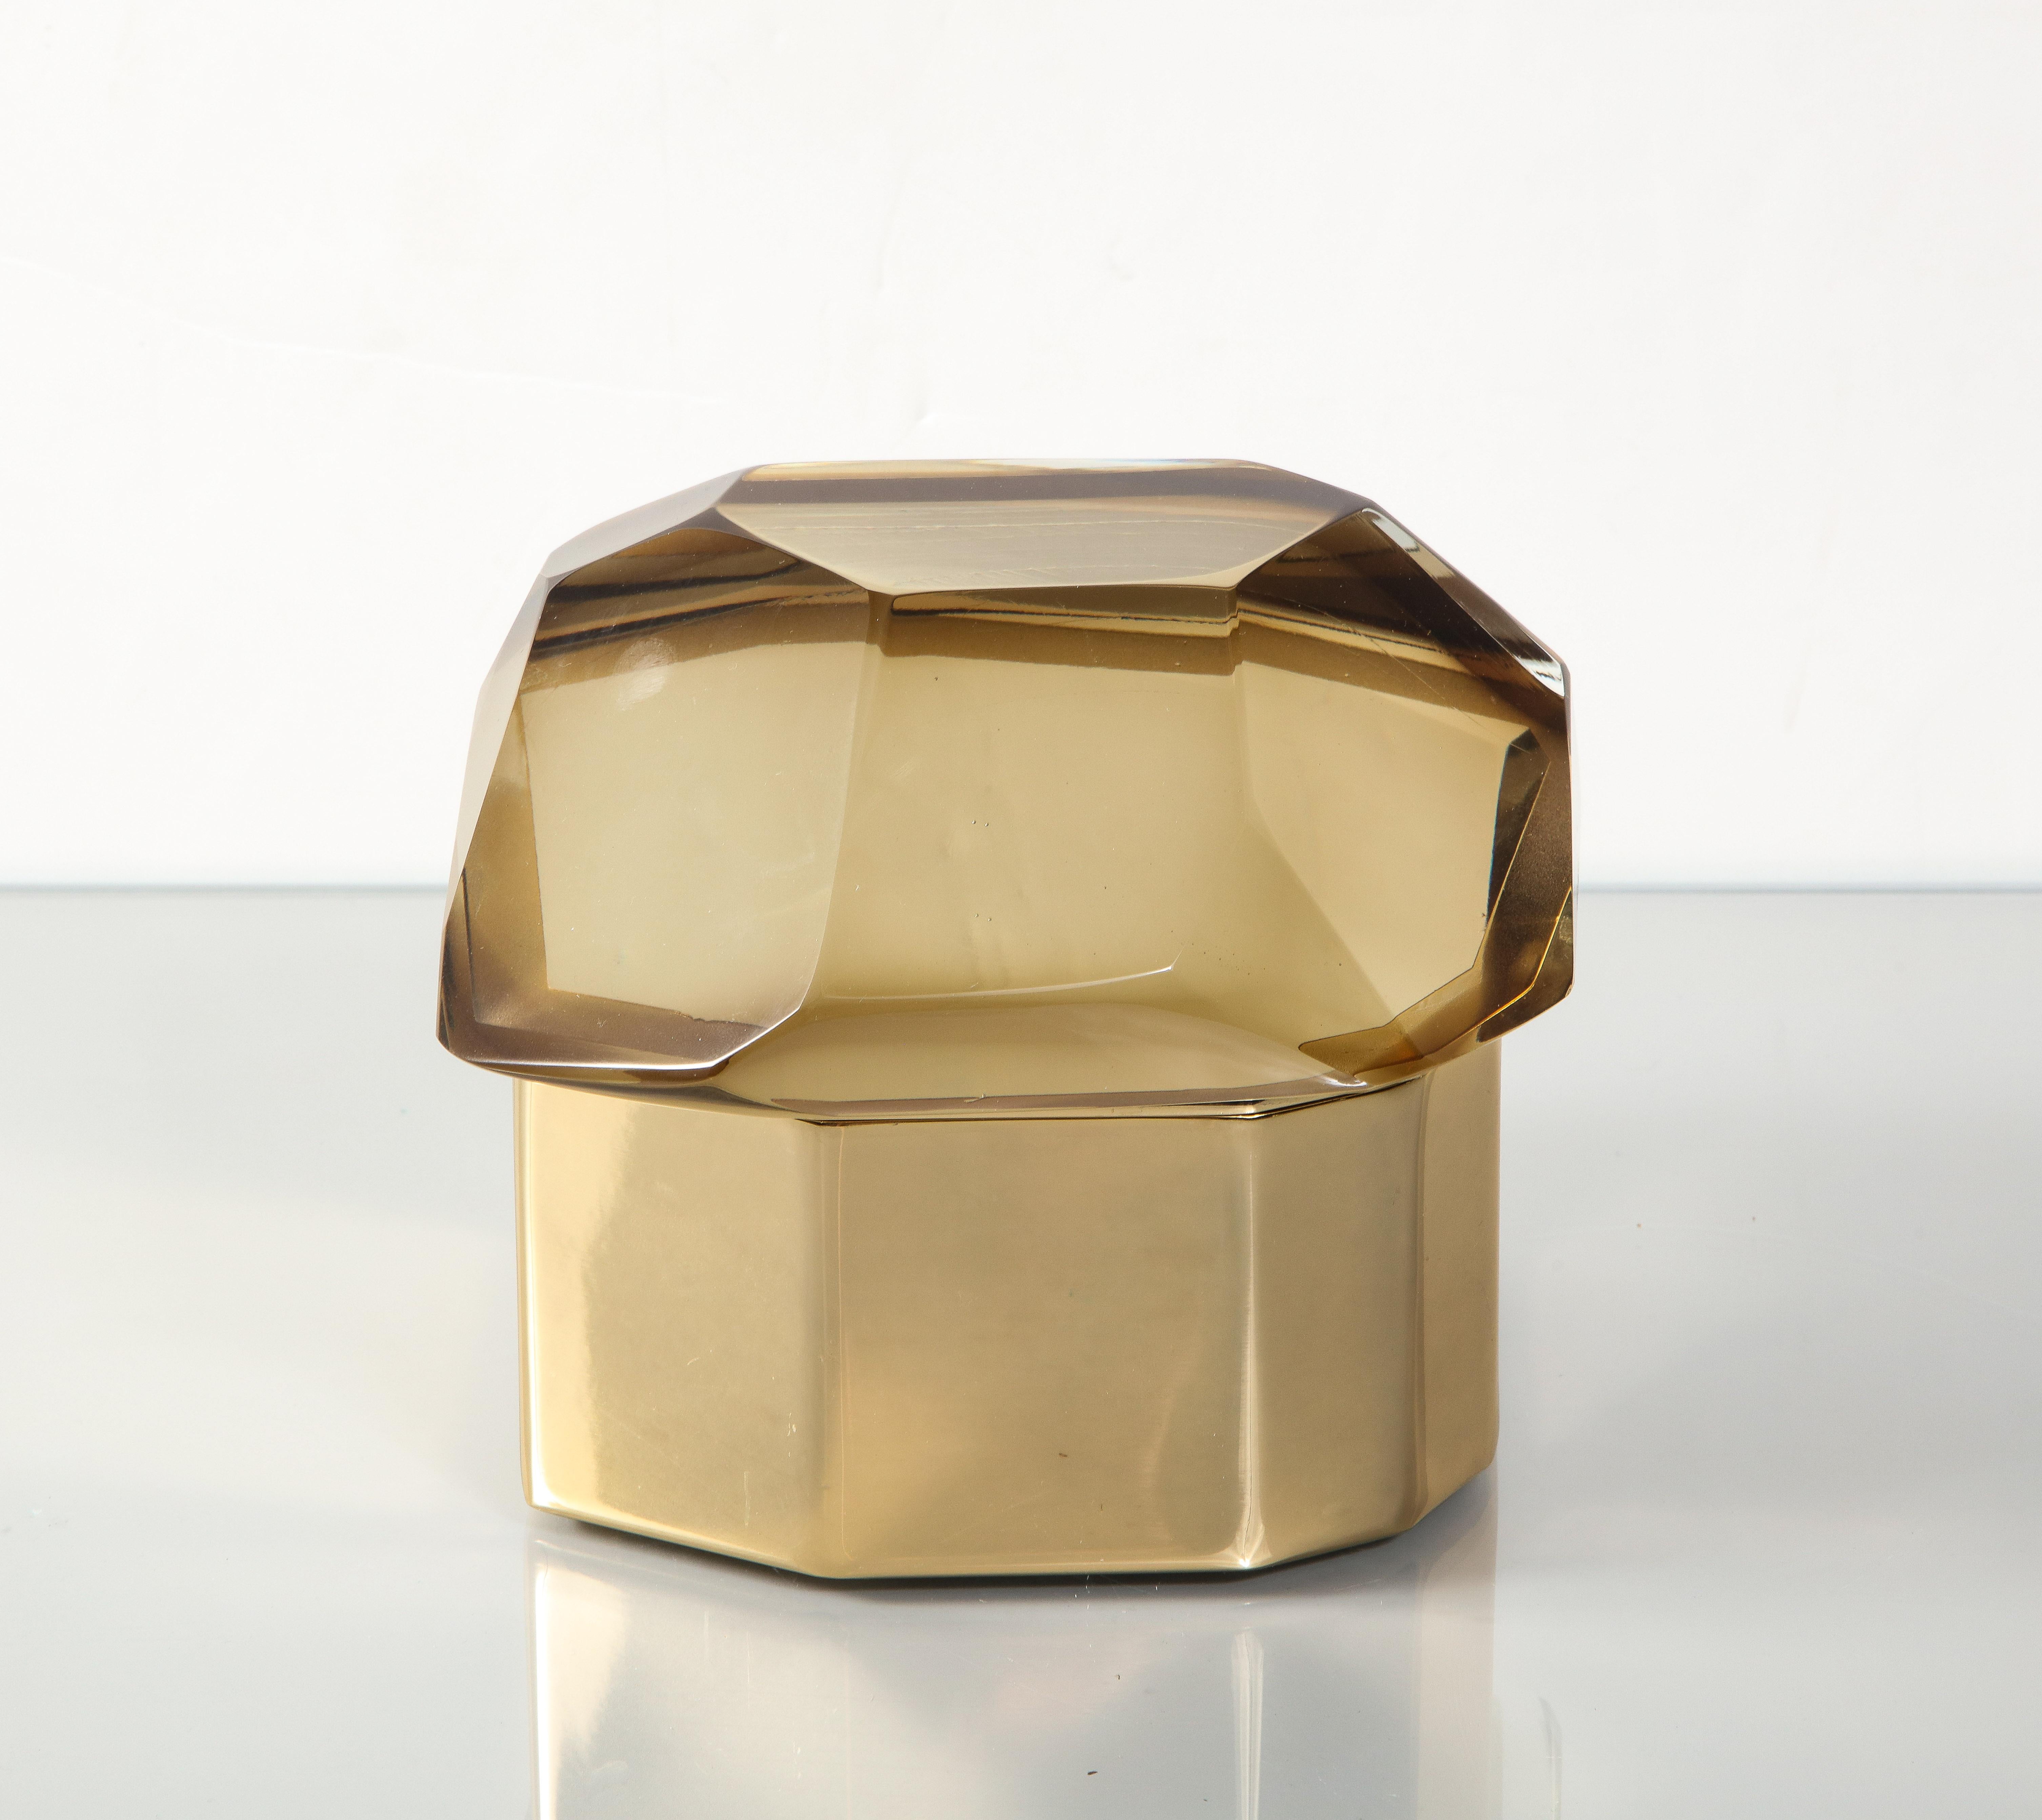 This Italian Murano glass and polished brass jewelry box is available for immediate purchase. Variations are available to glass color.